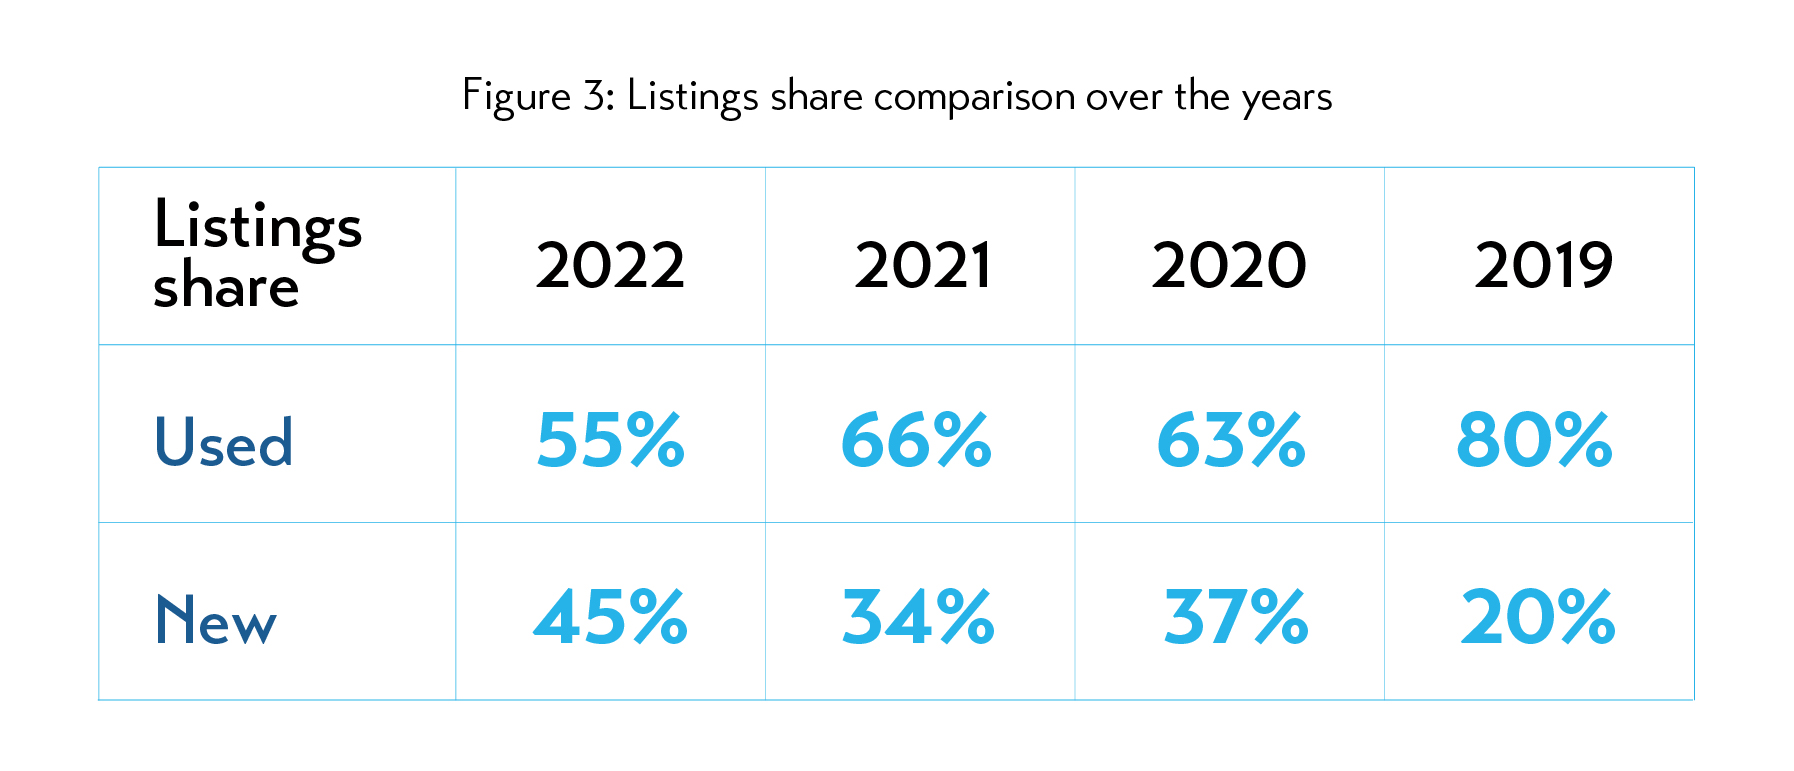 Listings share comparison over the years